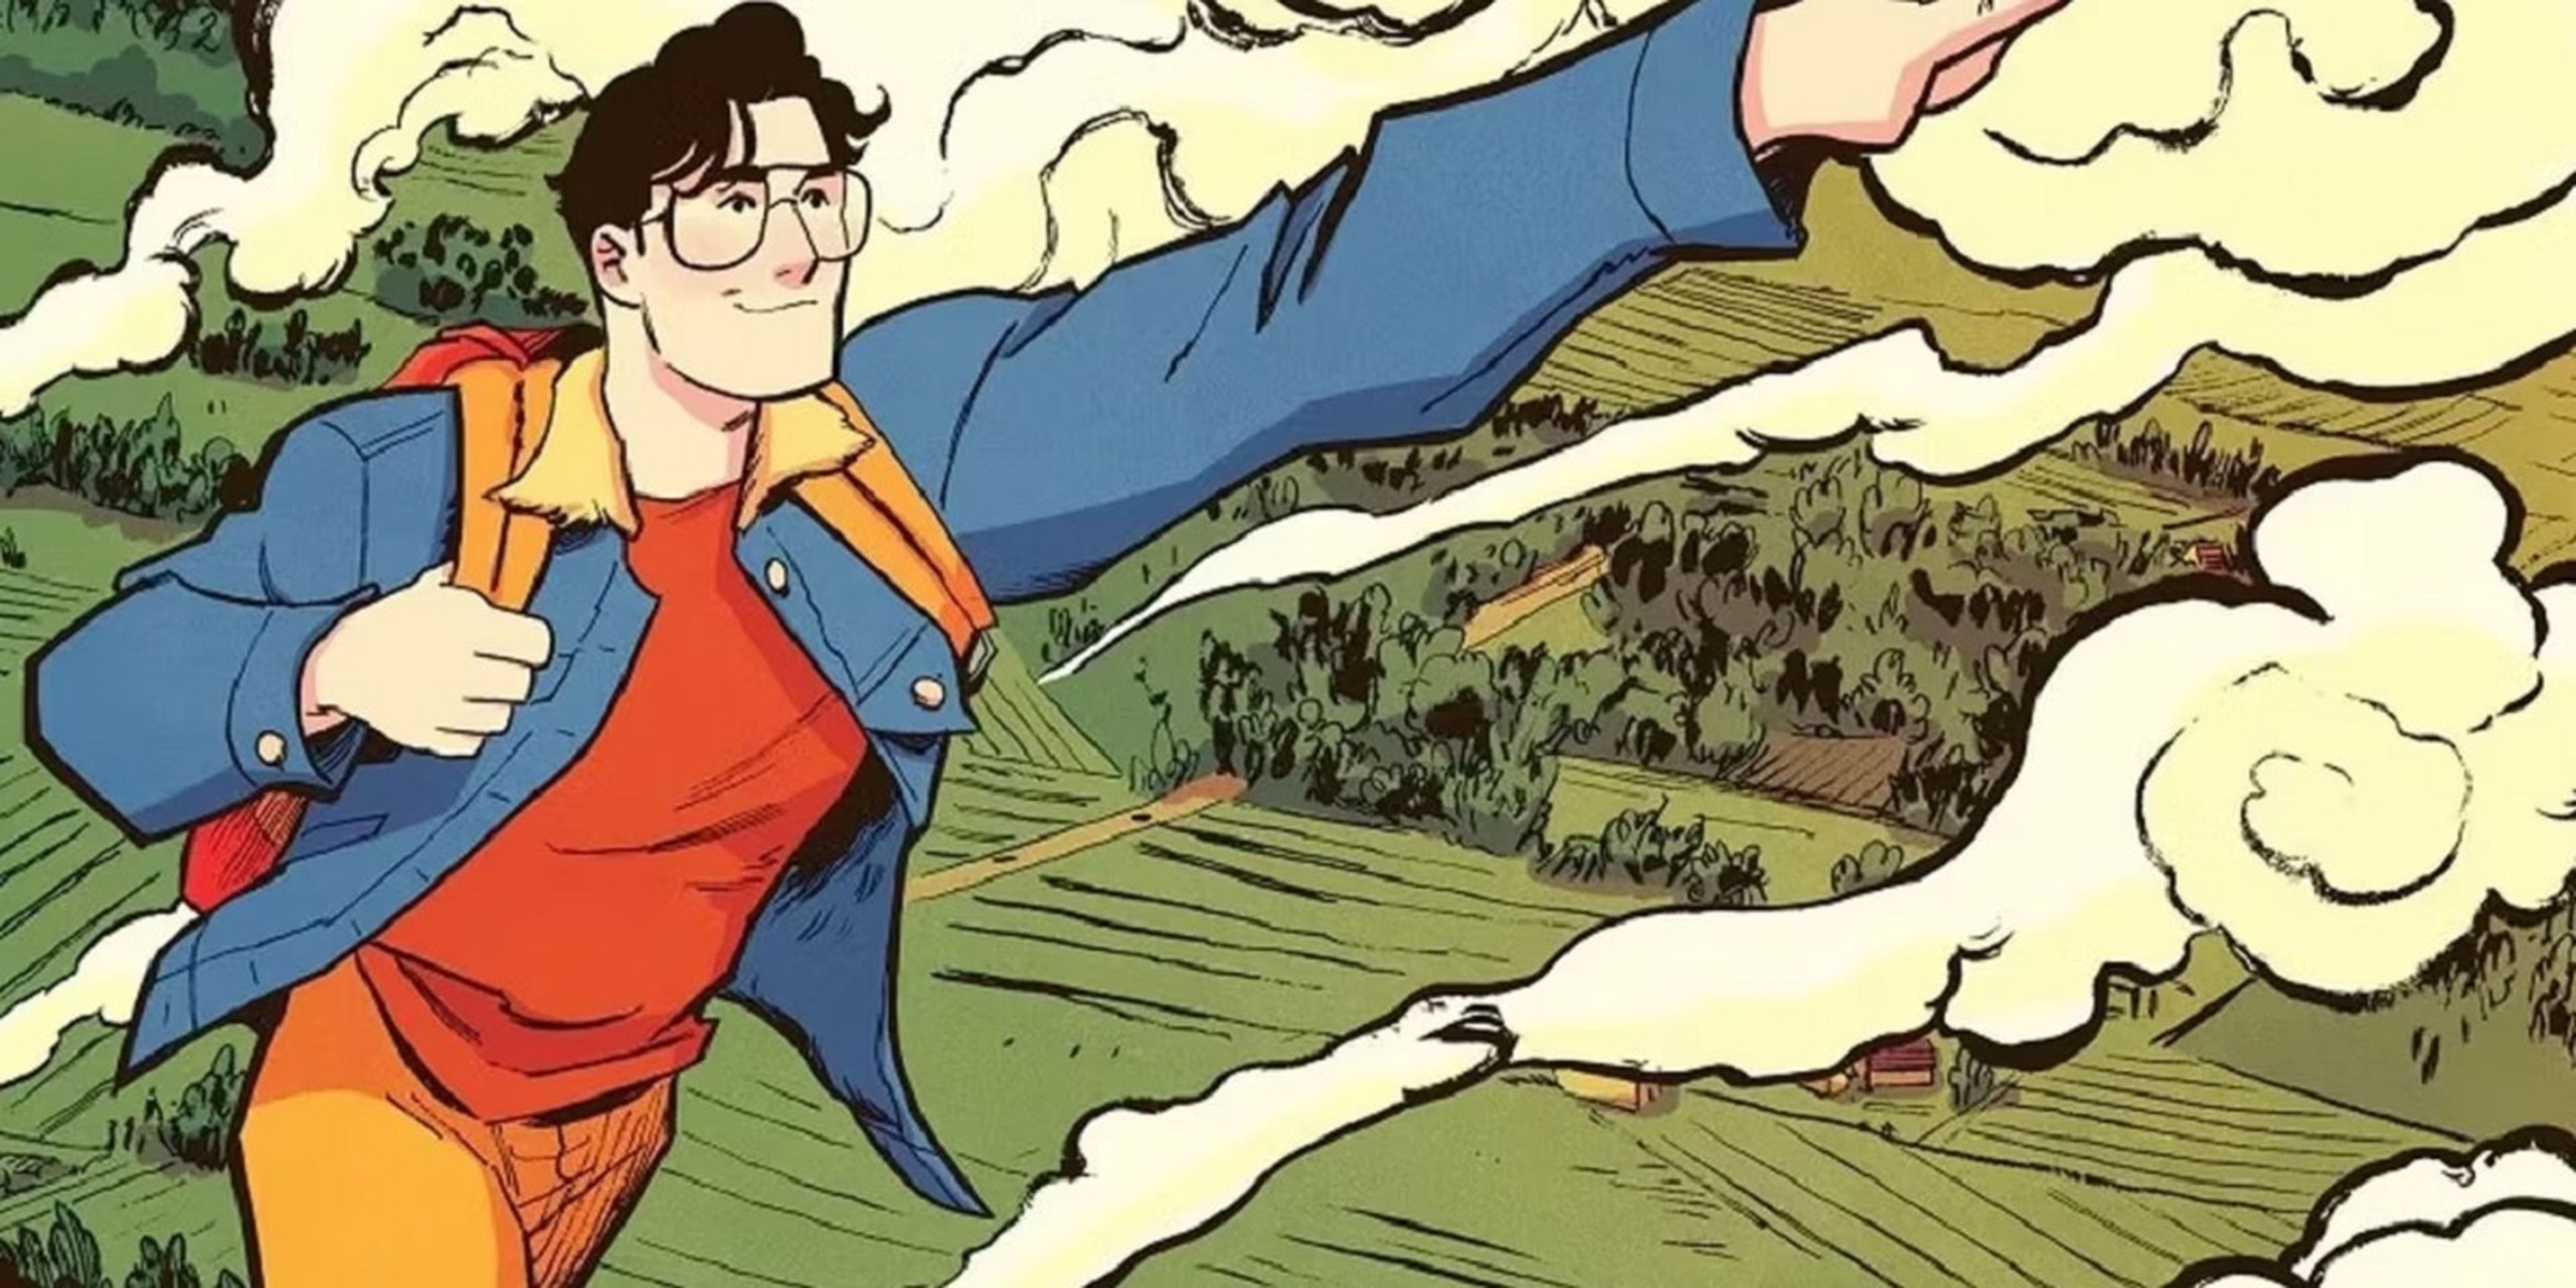 Superman: The Harvests of Youth